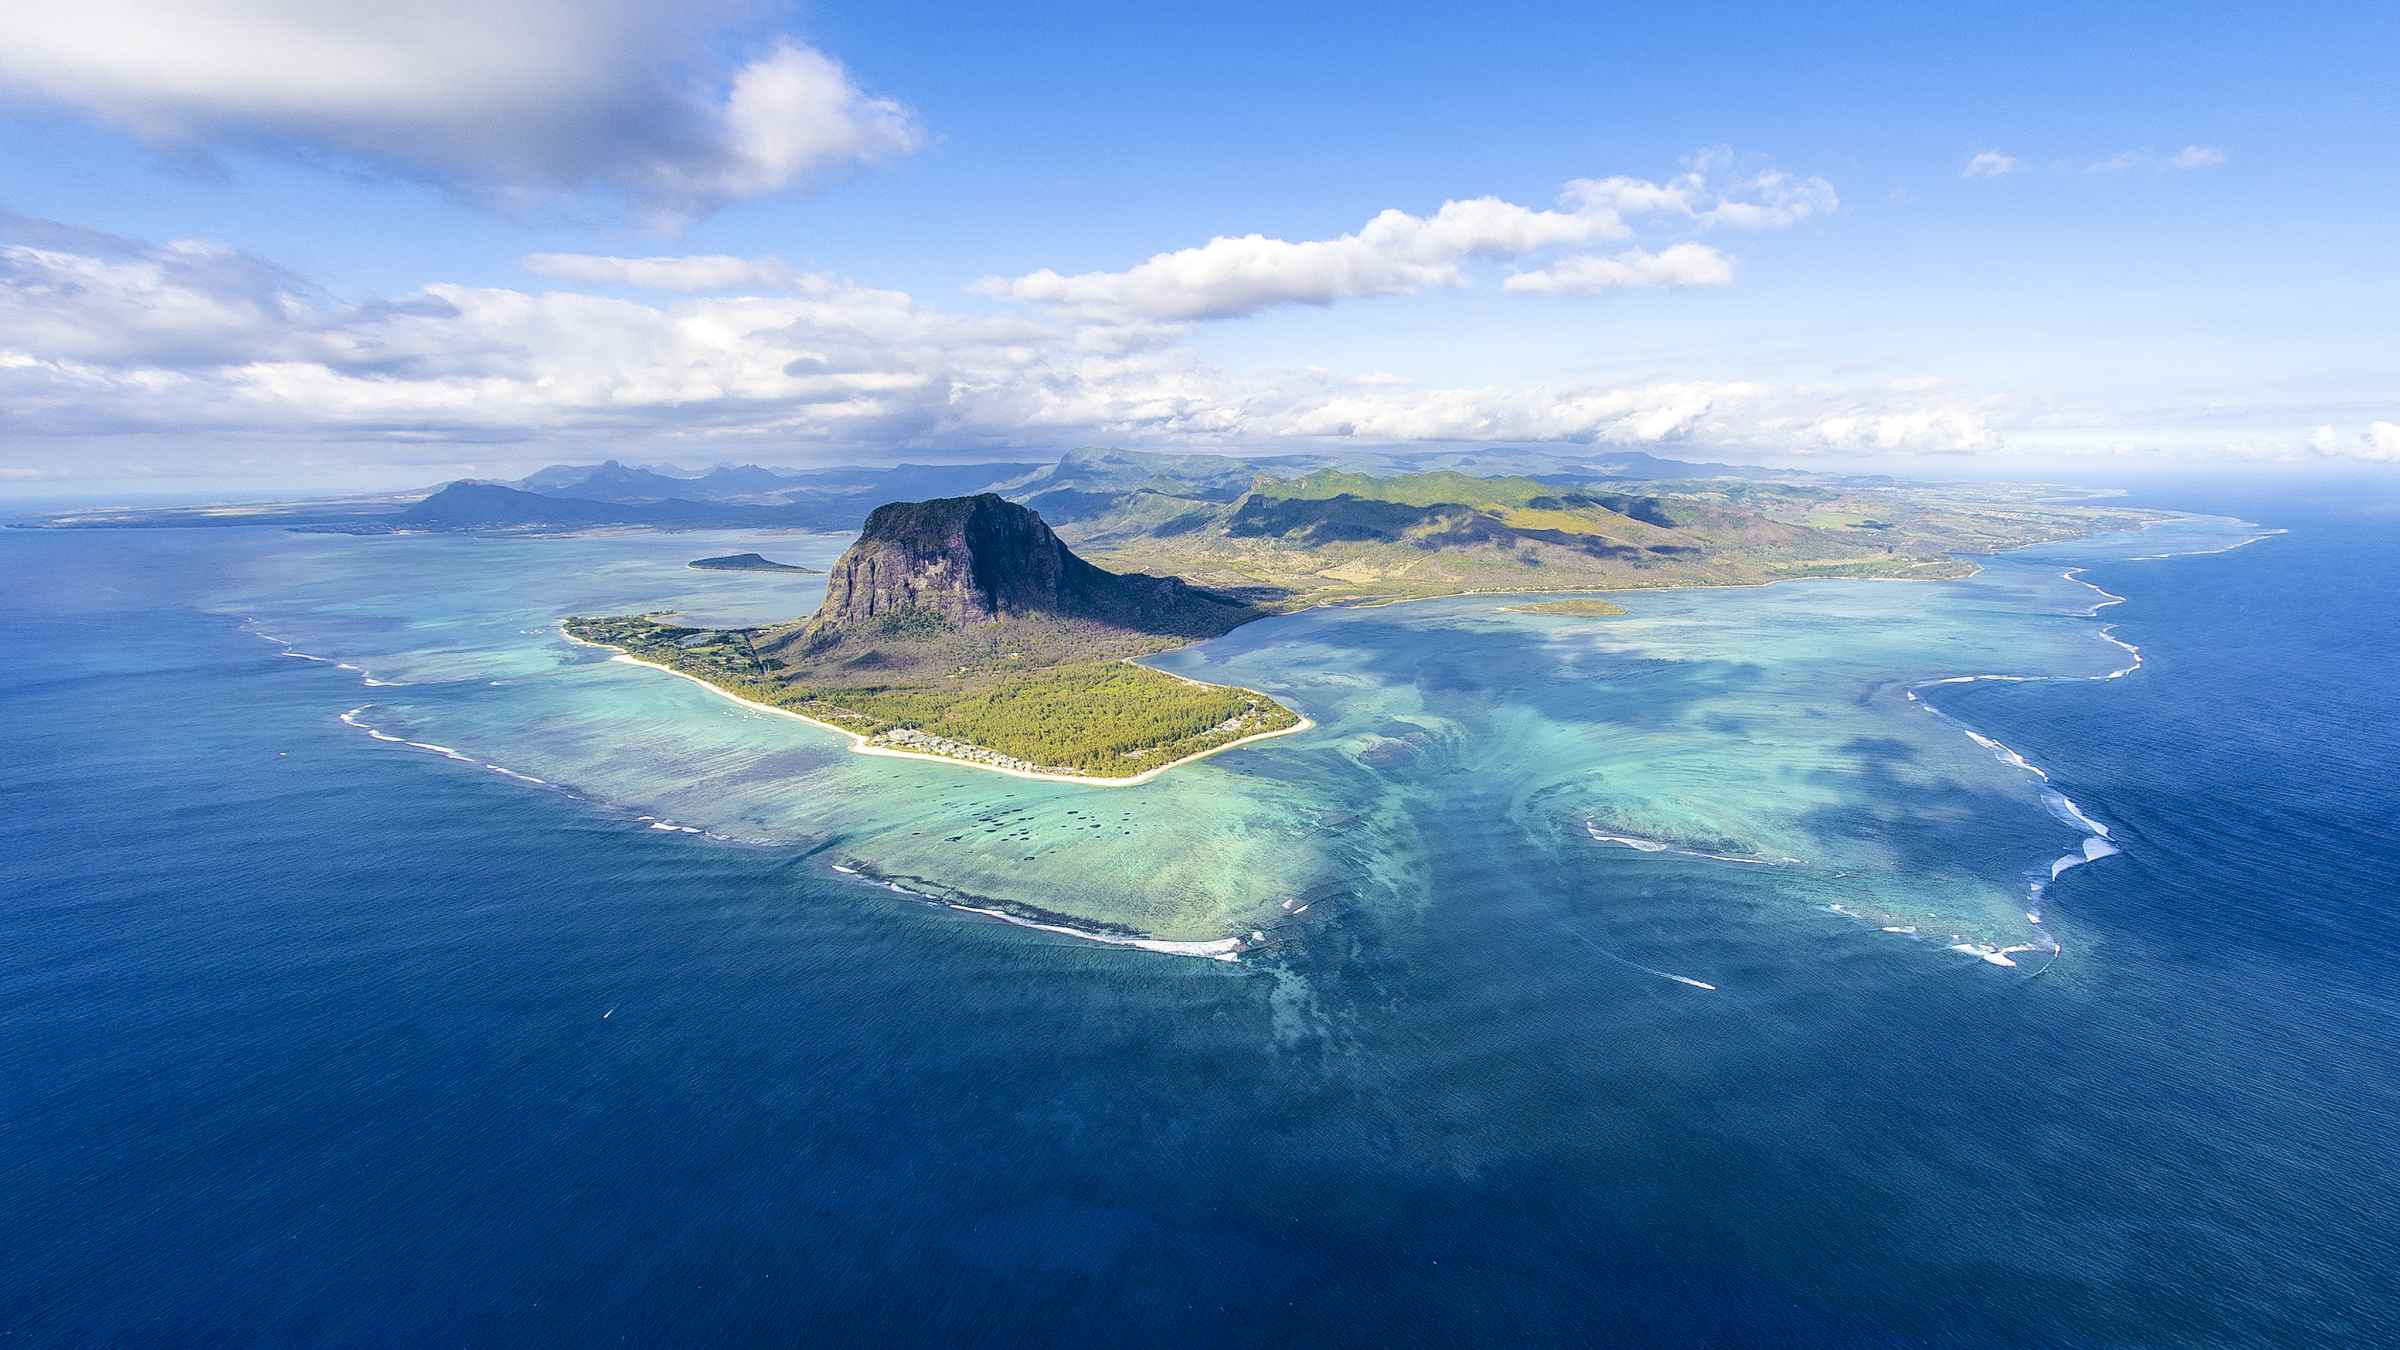 mauritius one day trip